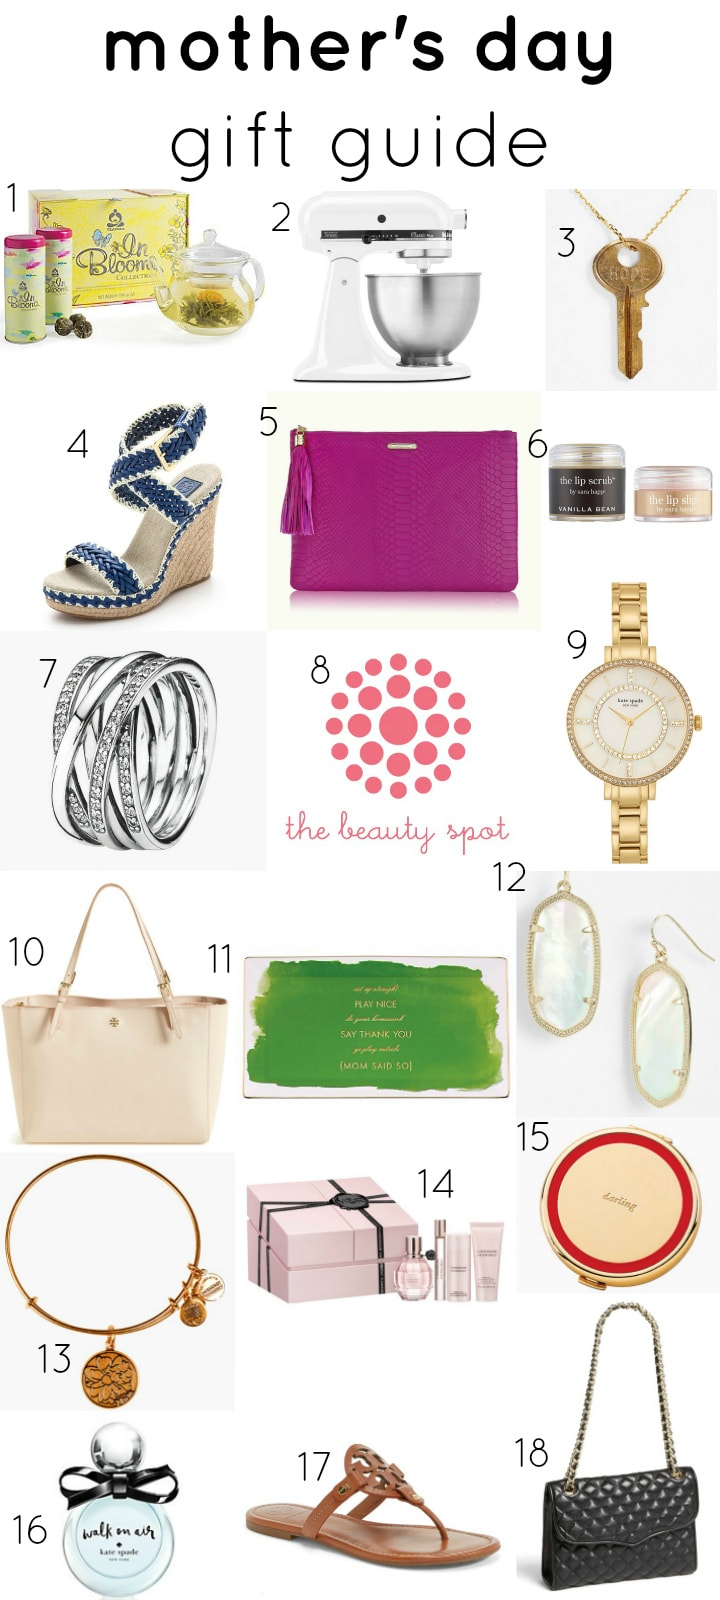 mothers-day-gift-guide-2015